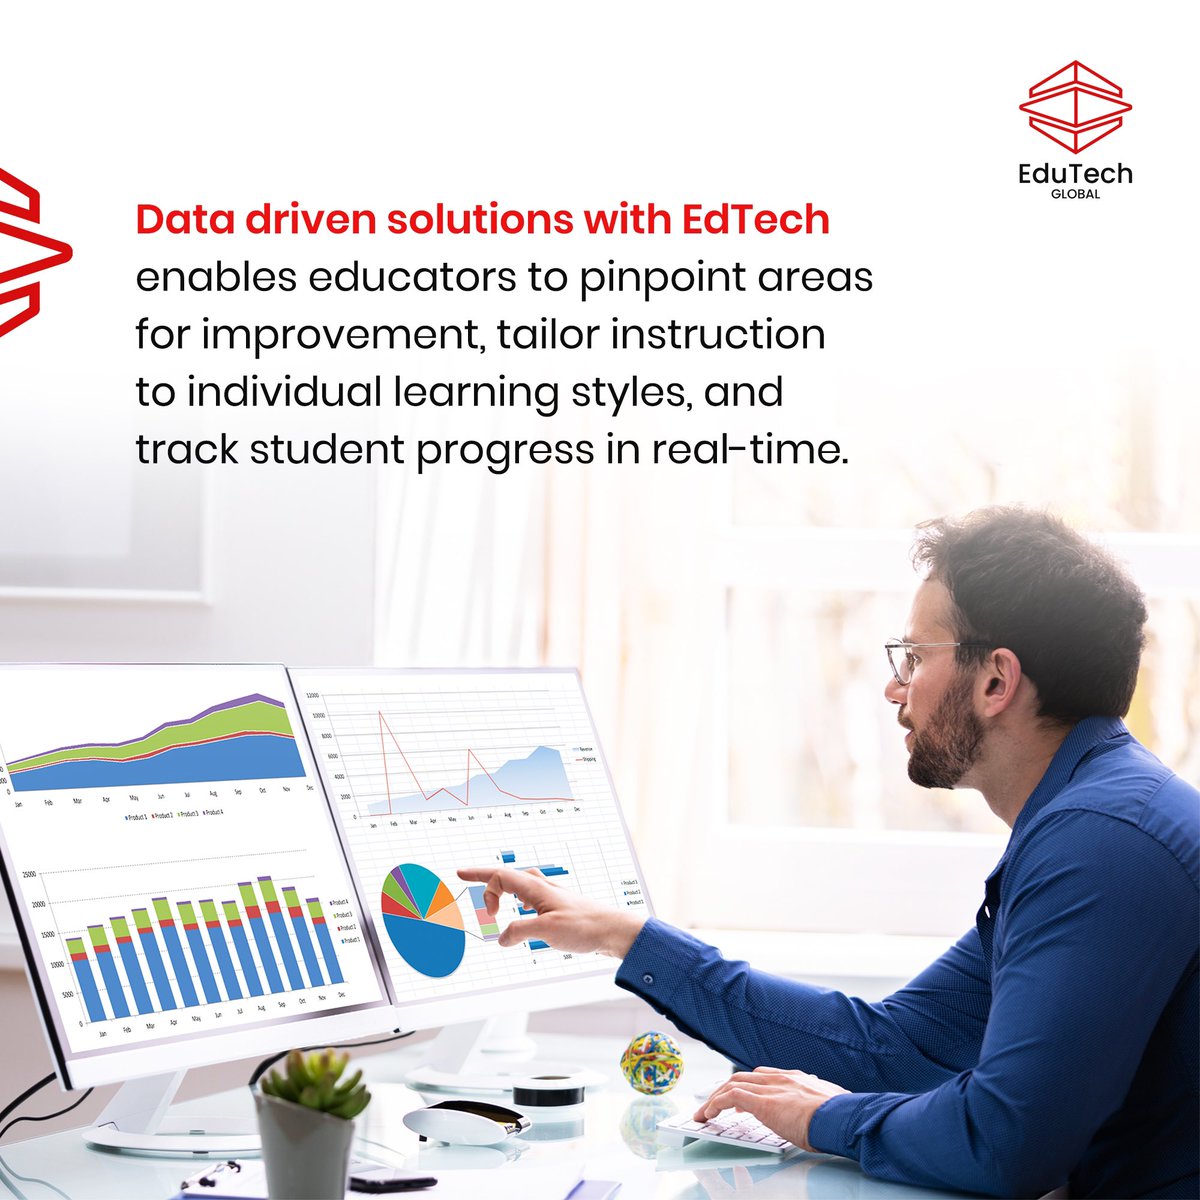 By leveraging data analytics, we’re not just revolutionizing teaching – we’re empowering educators to make informed decisions that drive meaningful learning outcomes.

#edtech #datadrivensolutions #dataanalytics #education #EduTechGlobal